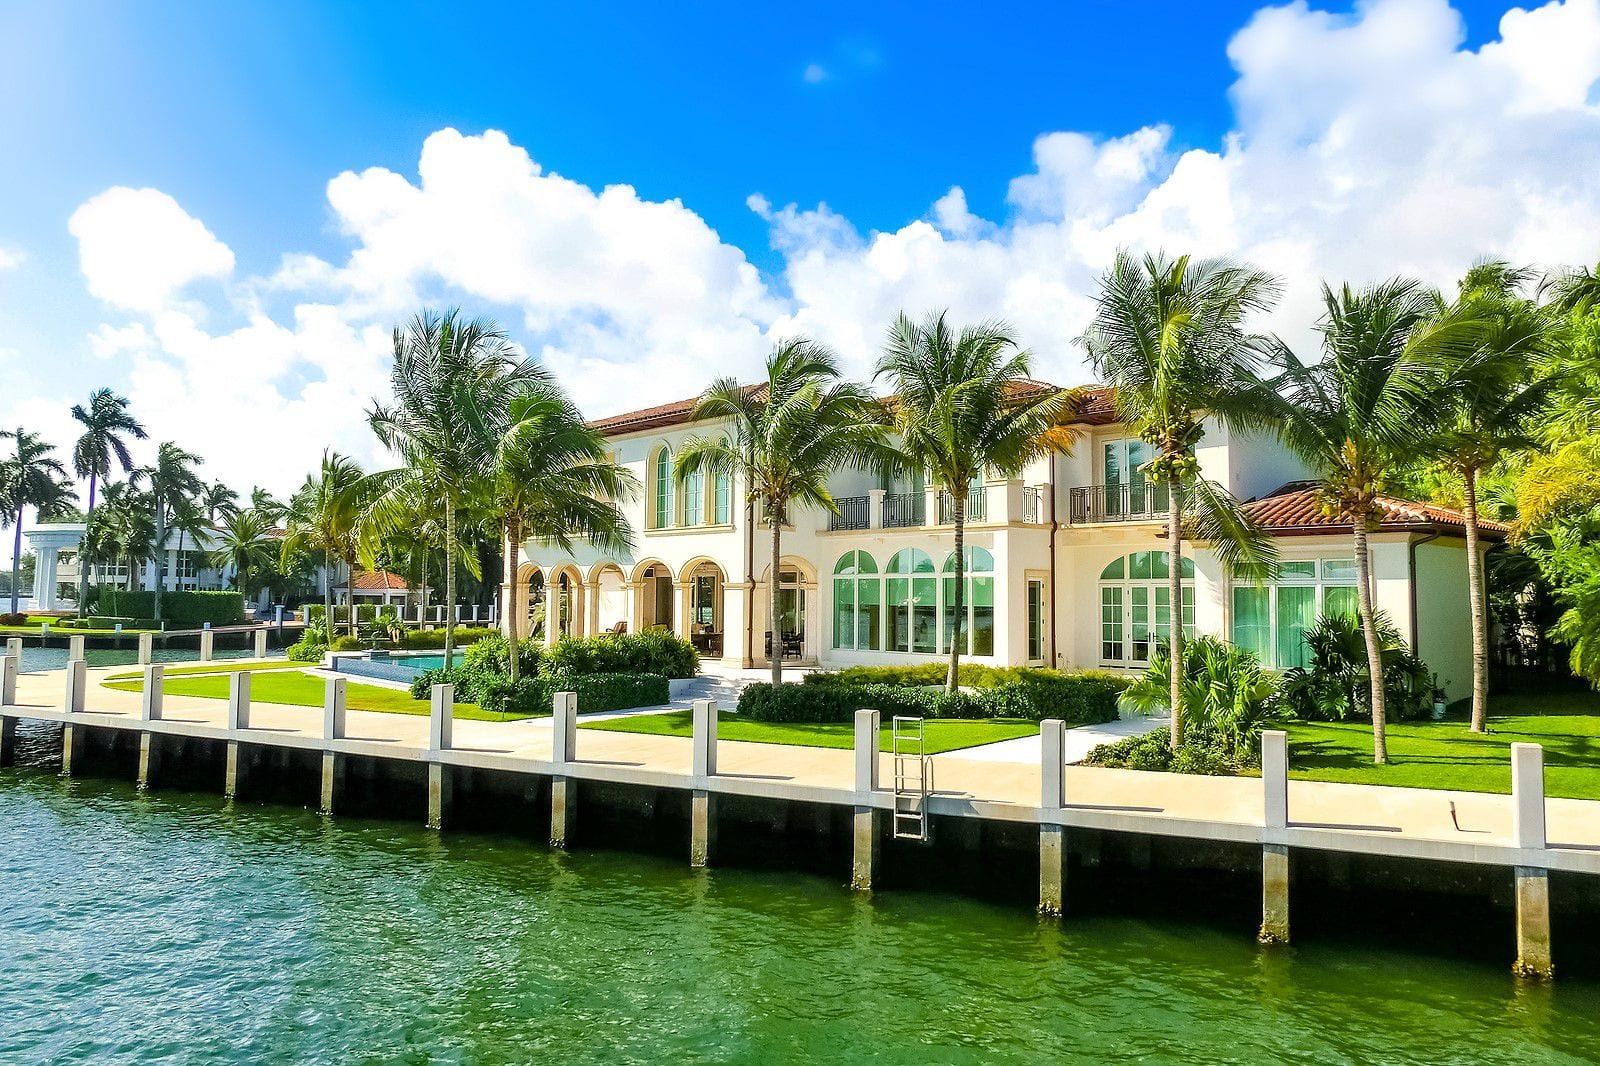 Miami Vs Fort Lauderdale And Boca Raton: A Guide to Vacation Rental Property Investing